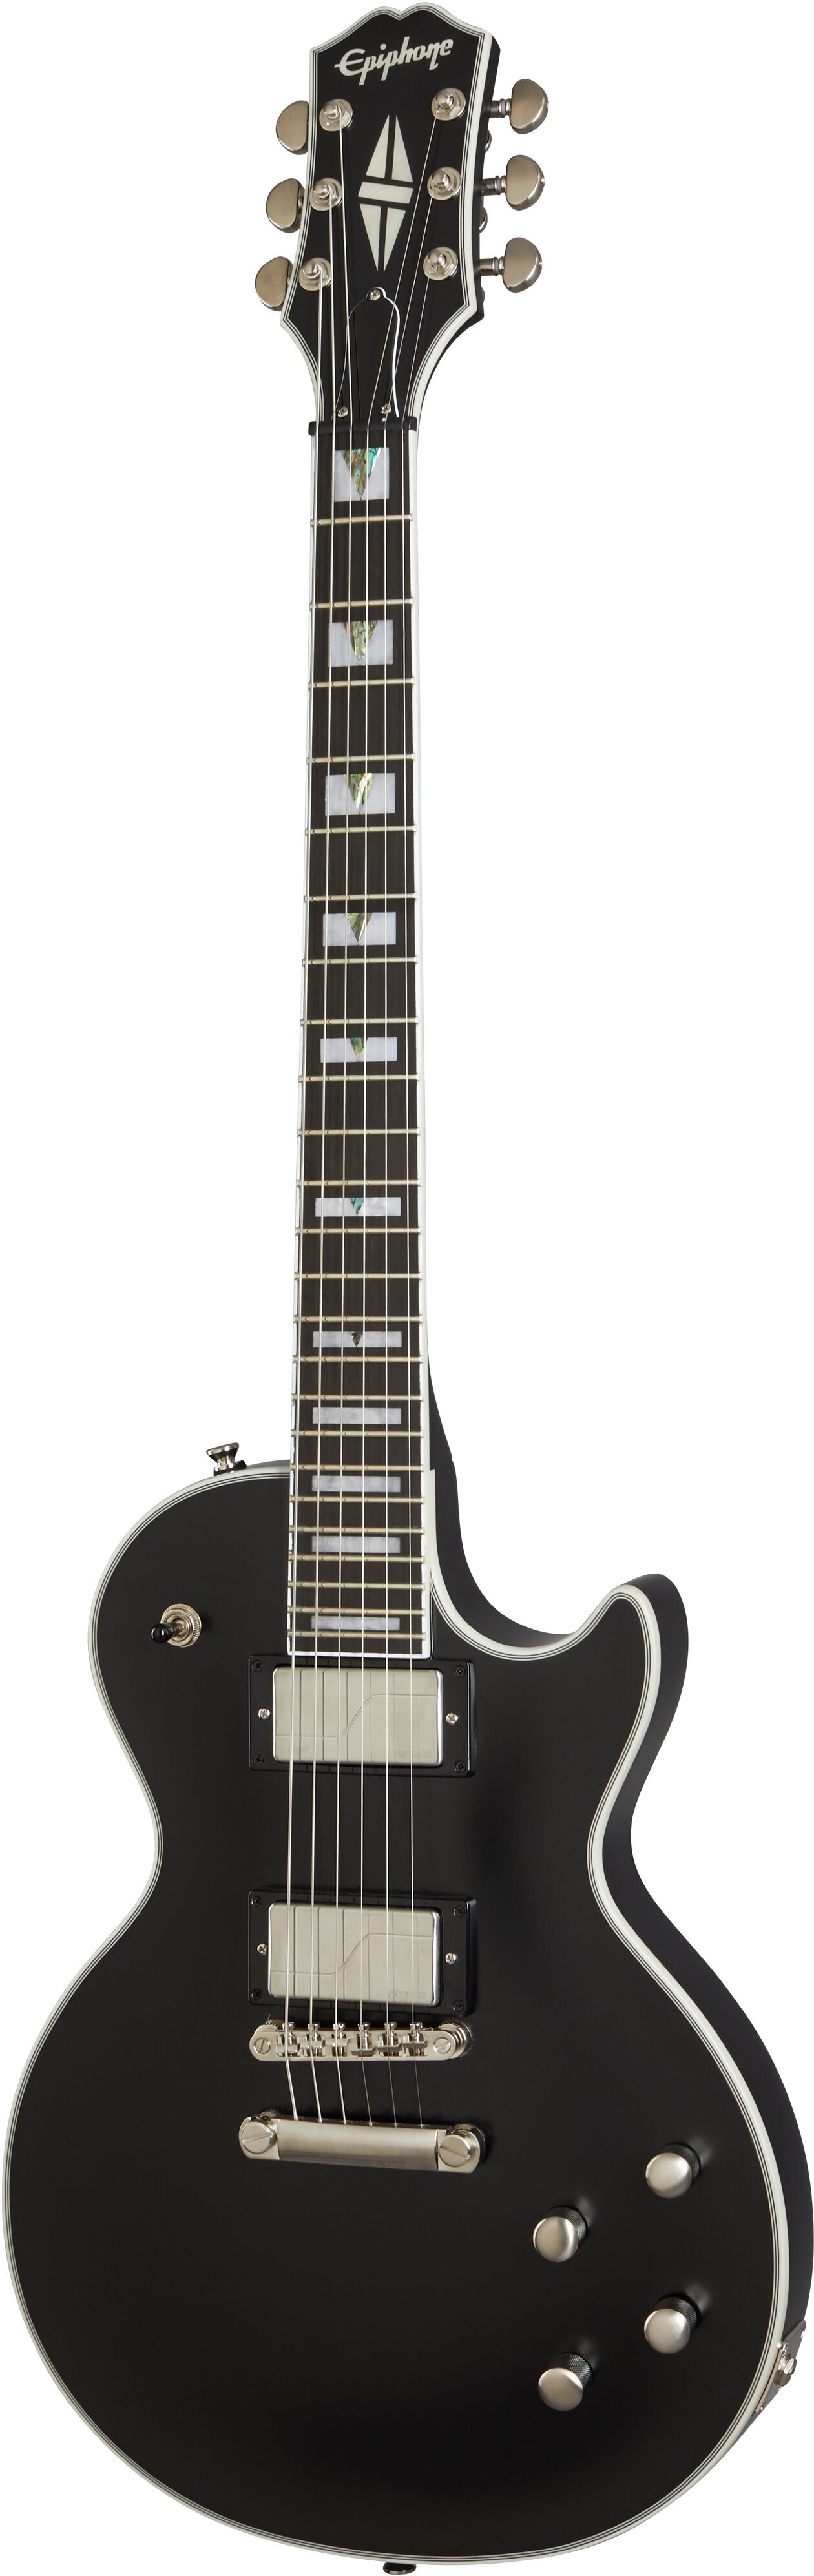 Epiphone Les Paul Prophecy Black Aged Gloss -  EILYBAGBNH1